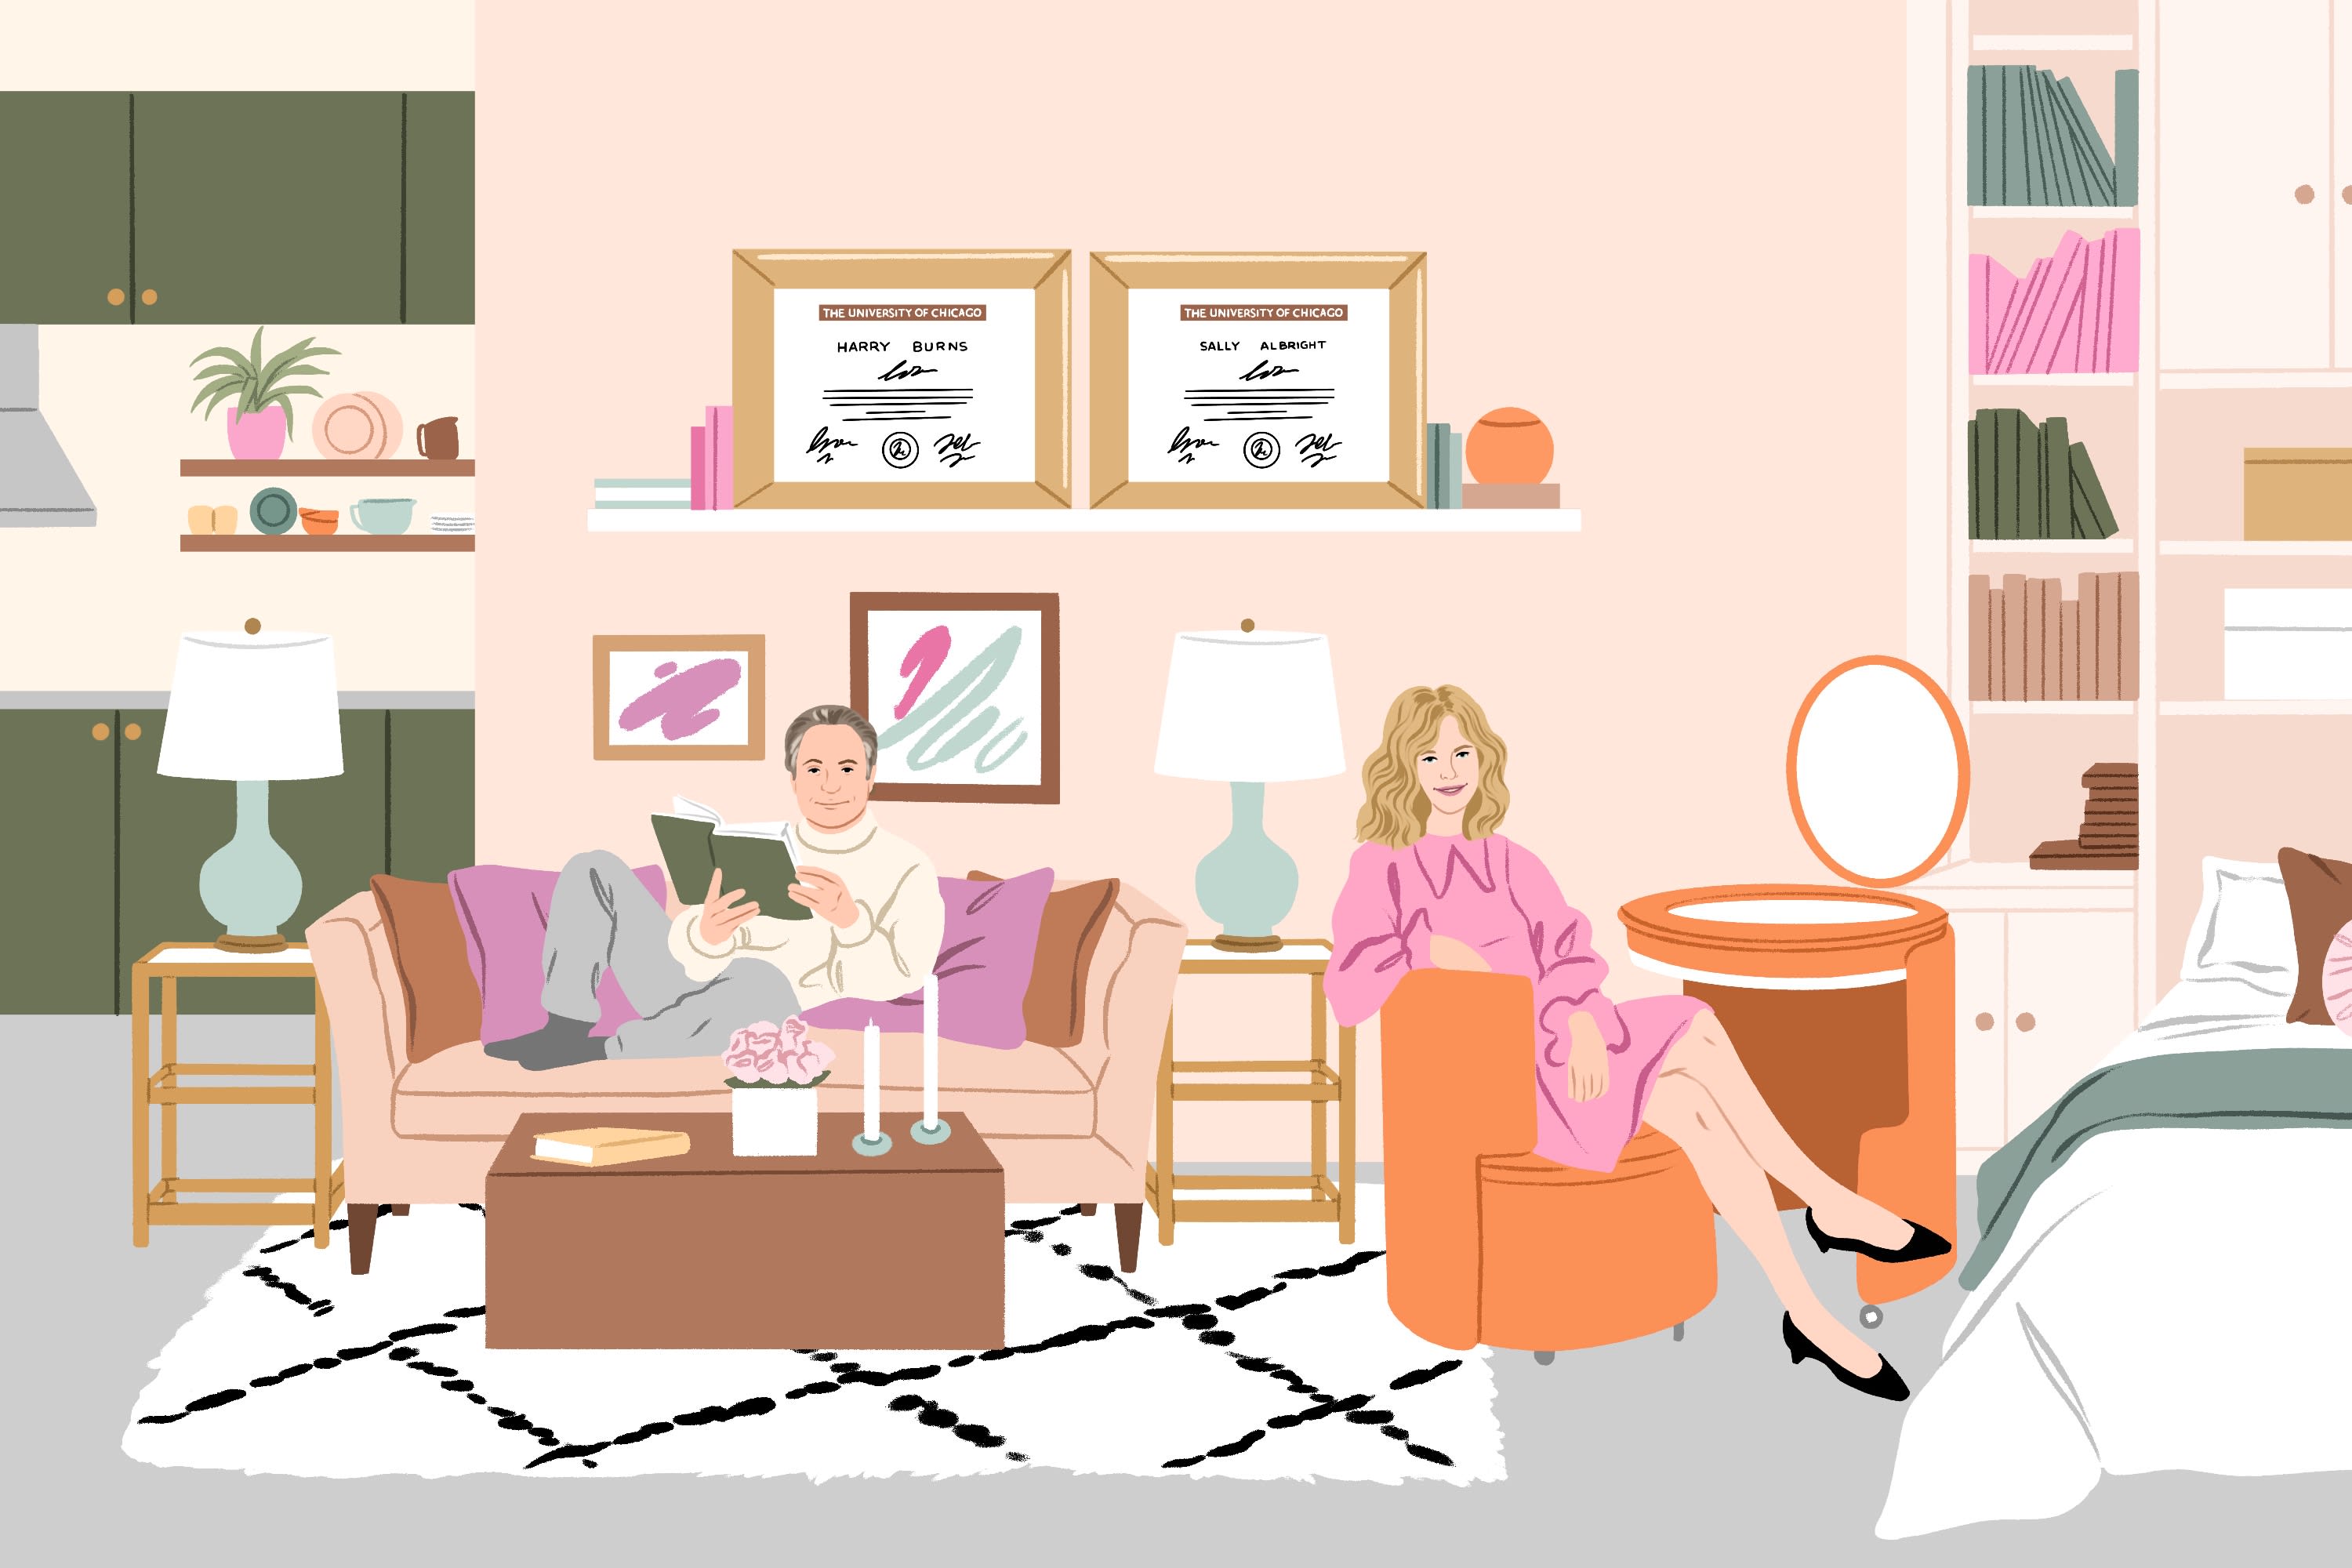 How Our Favorite RomCom Couples's Studio Apartments Would Look in Real Life  | Apartment Therapy